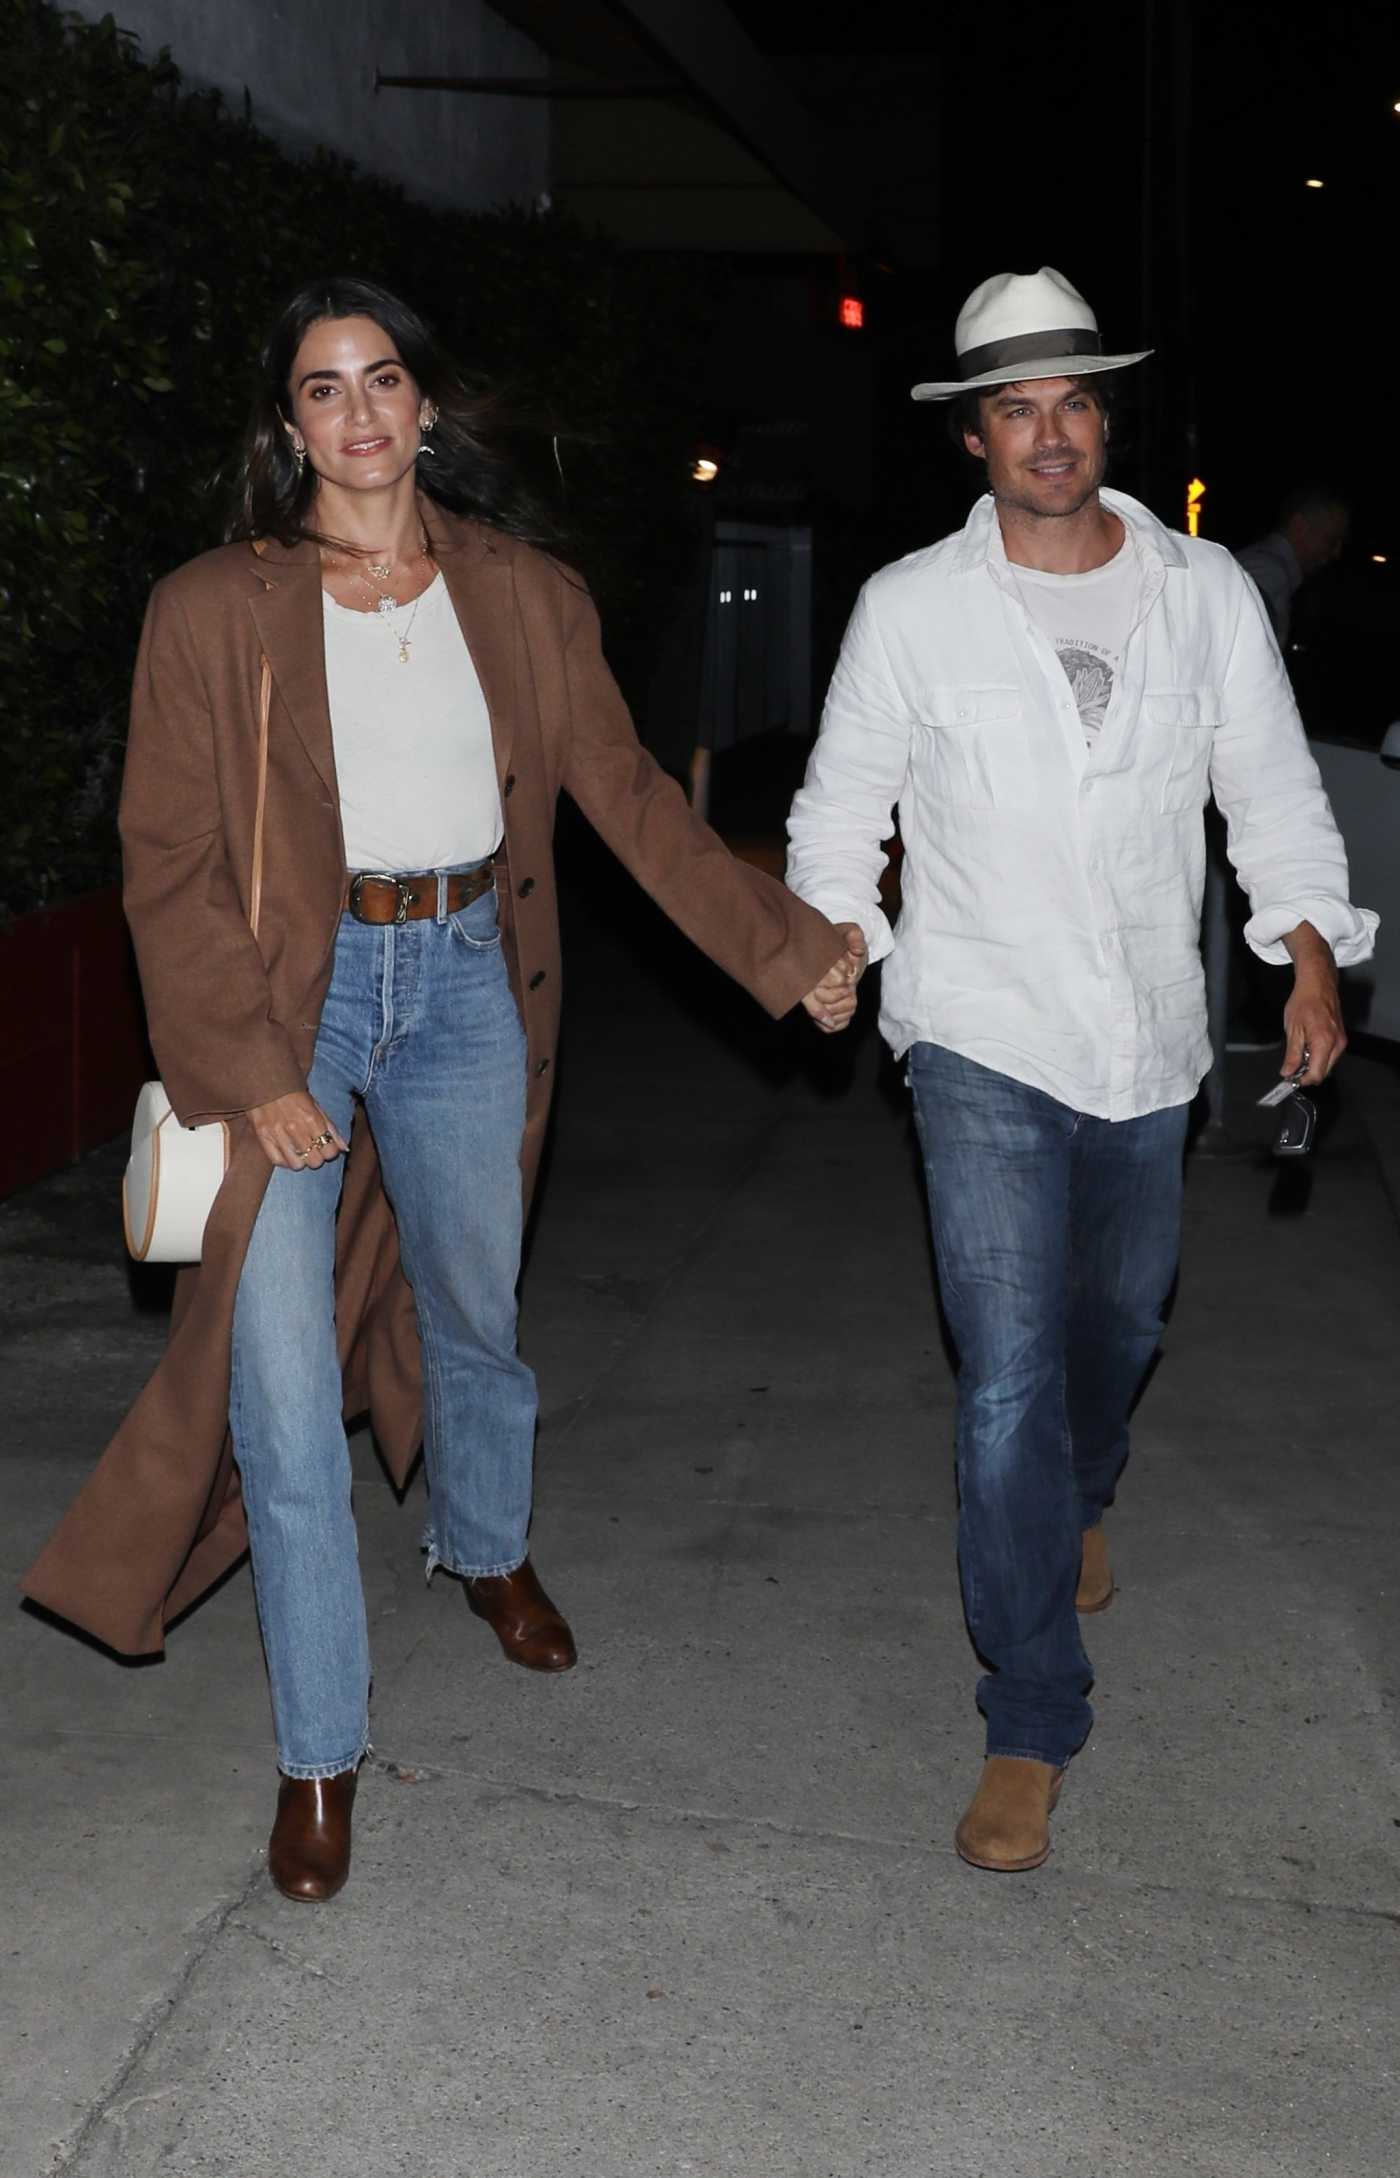 Nikki Reed in a Tan Coat Was Seen Out with Ian Somerhalder in Santa Monica 04/06/2022